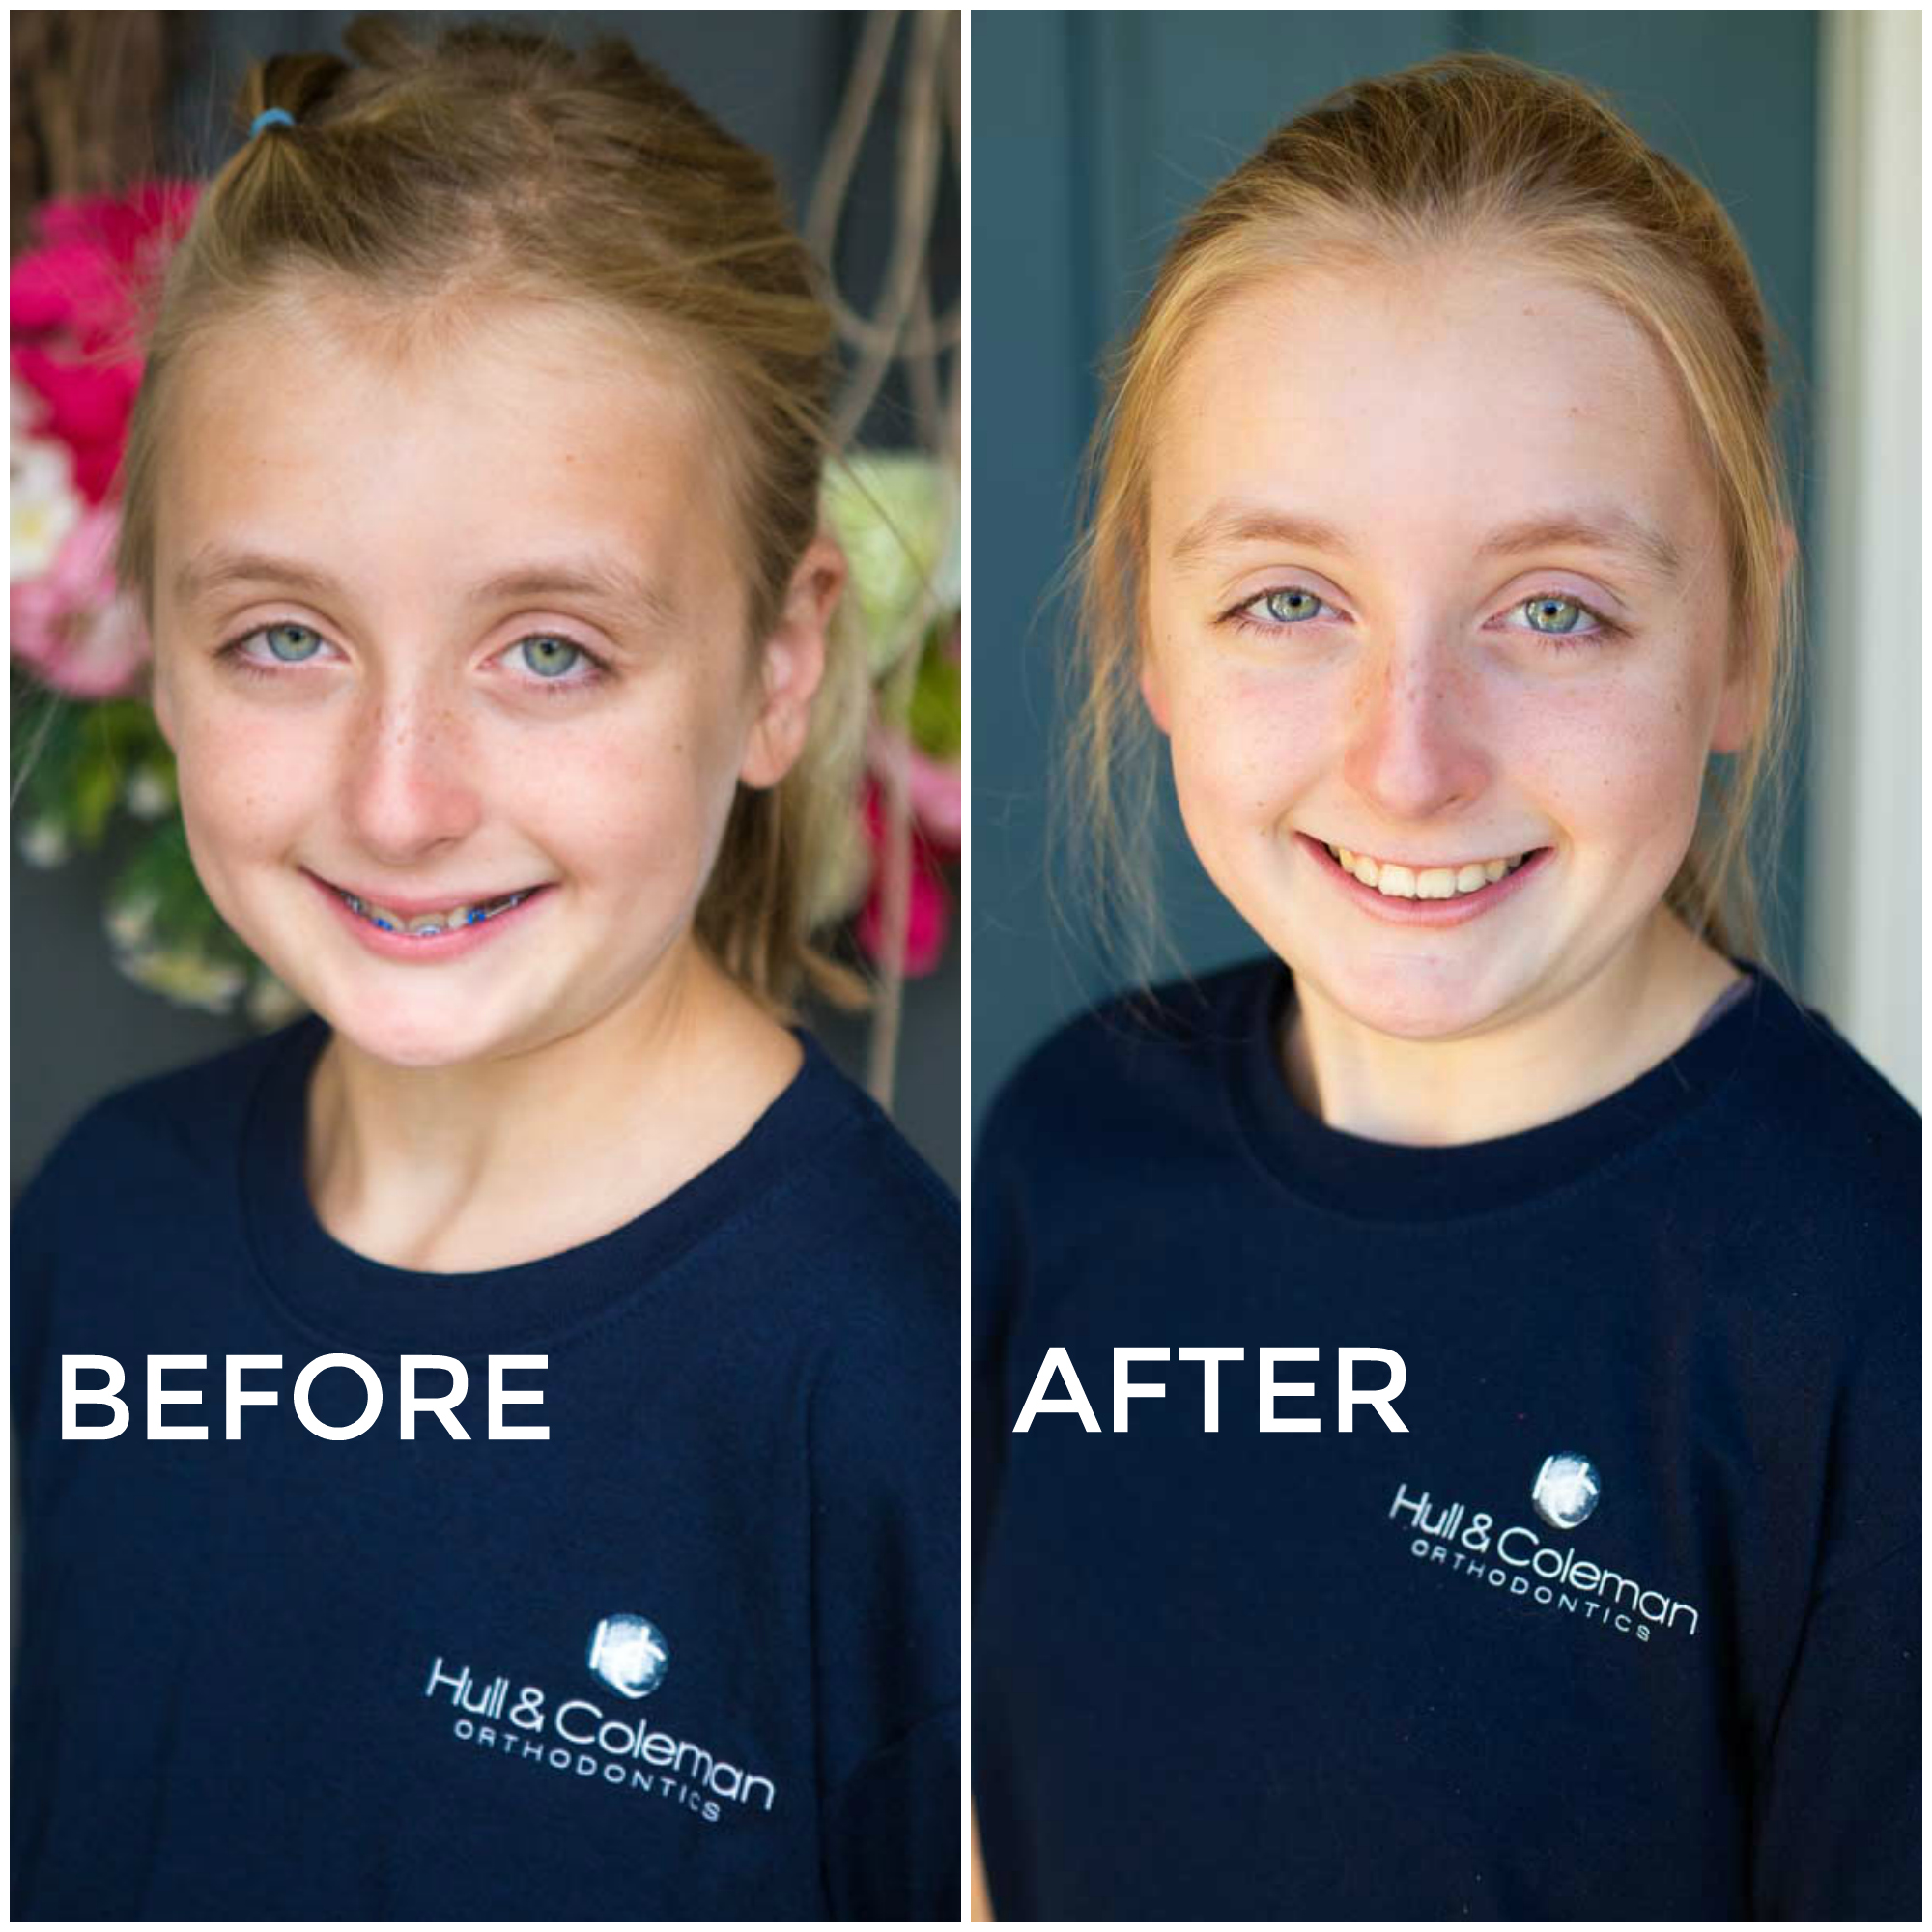 Before and After Braces picture. In just 2 years it is amazing what the team at Hull & Coleman can do to adjust a tween's smile.